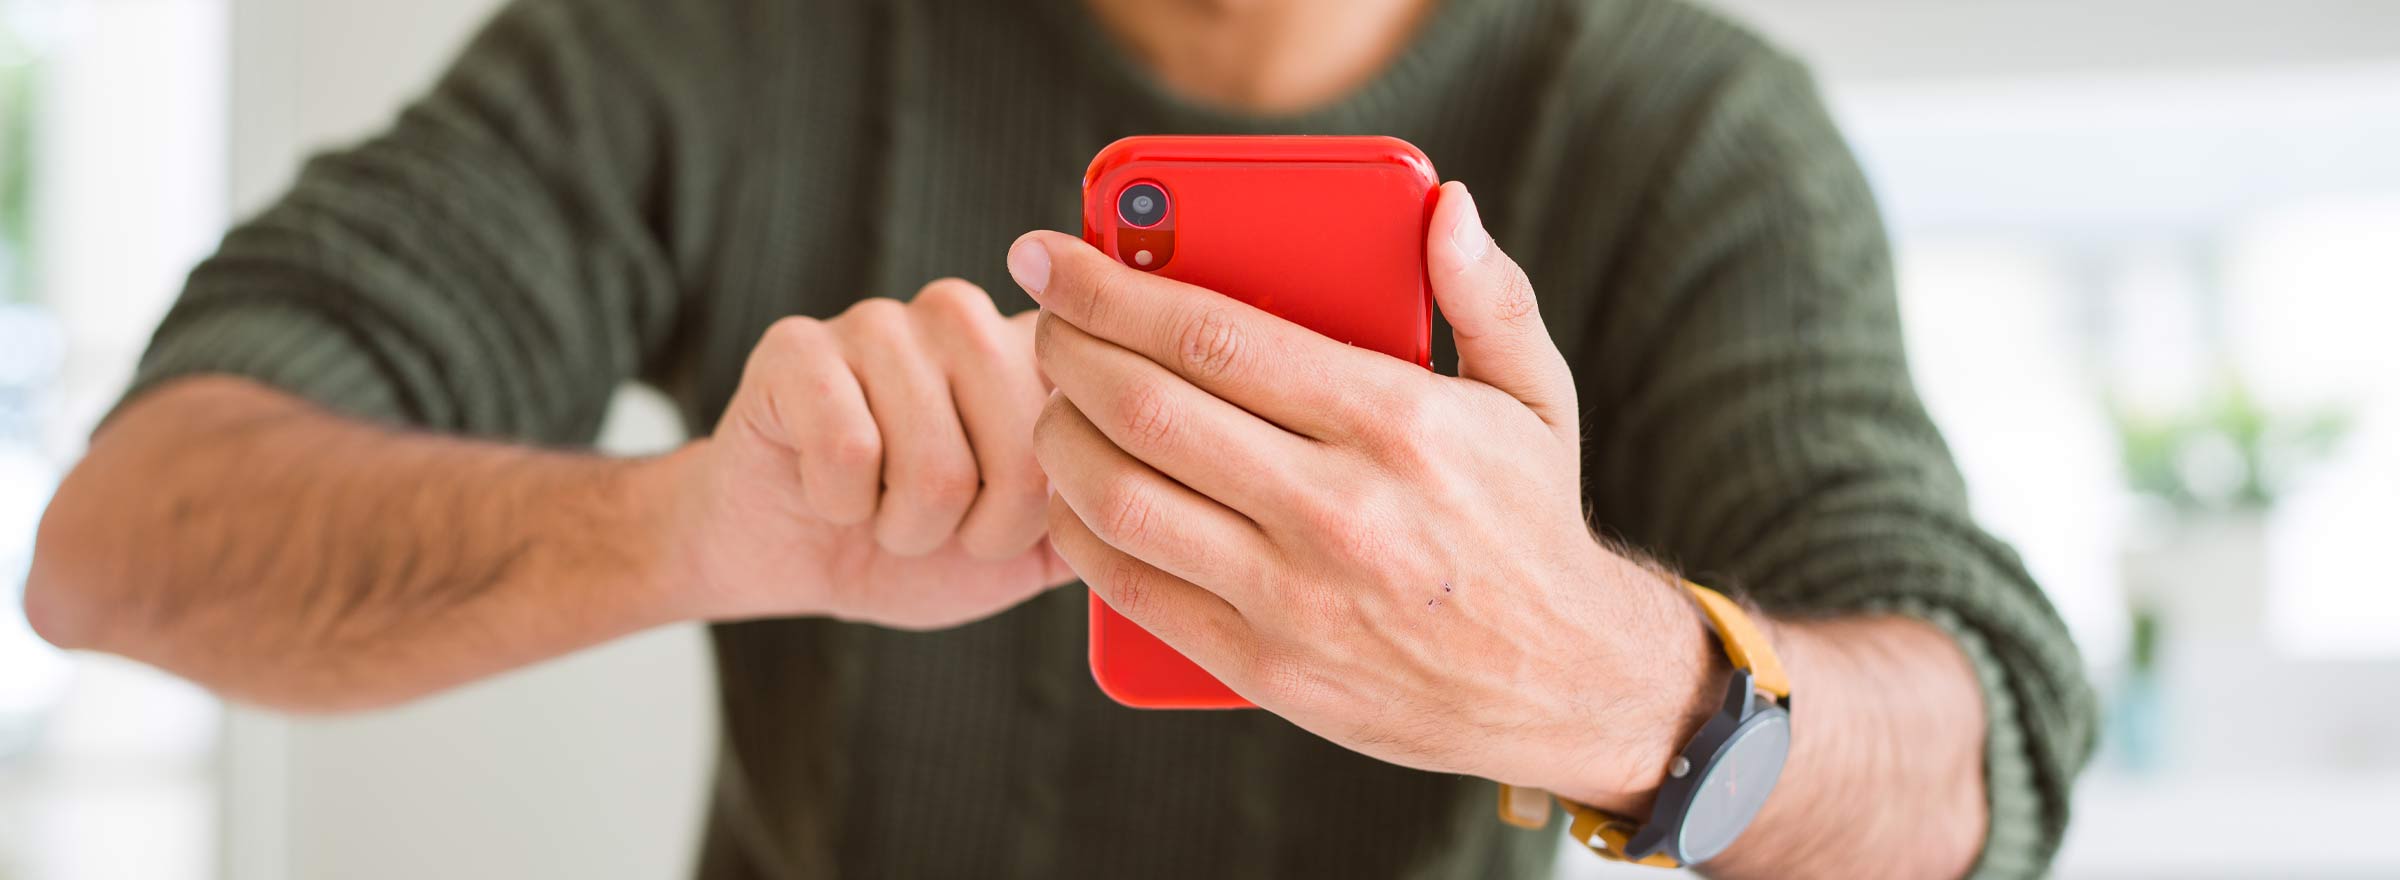 arms of a man using a red smartphone